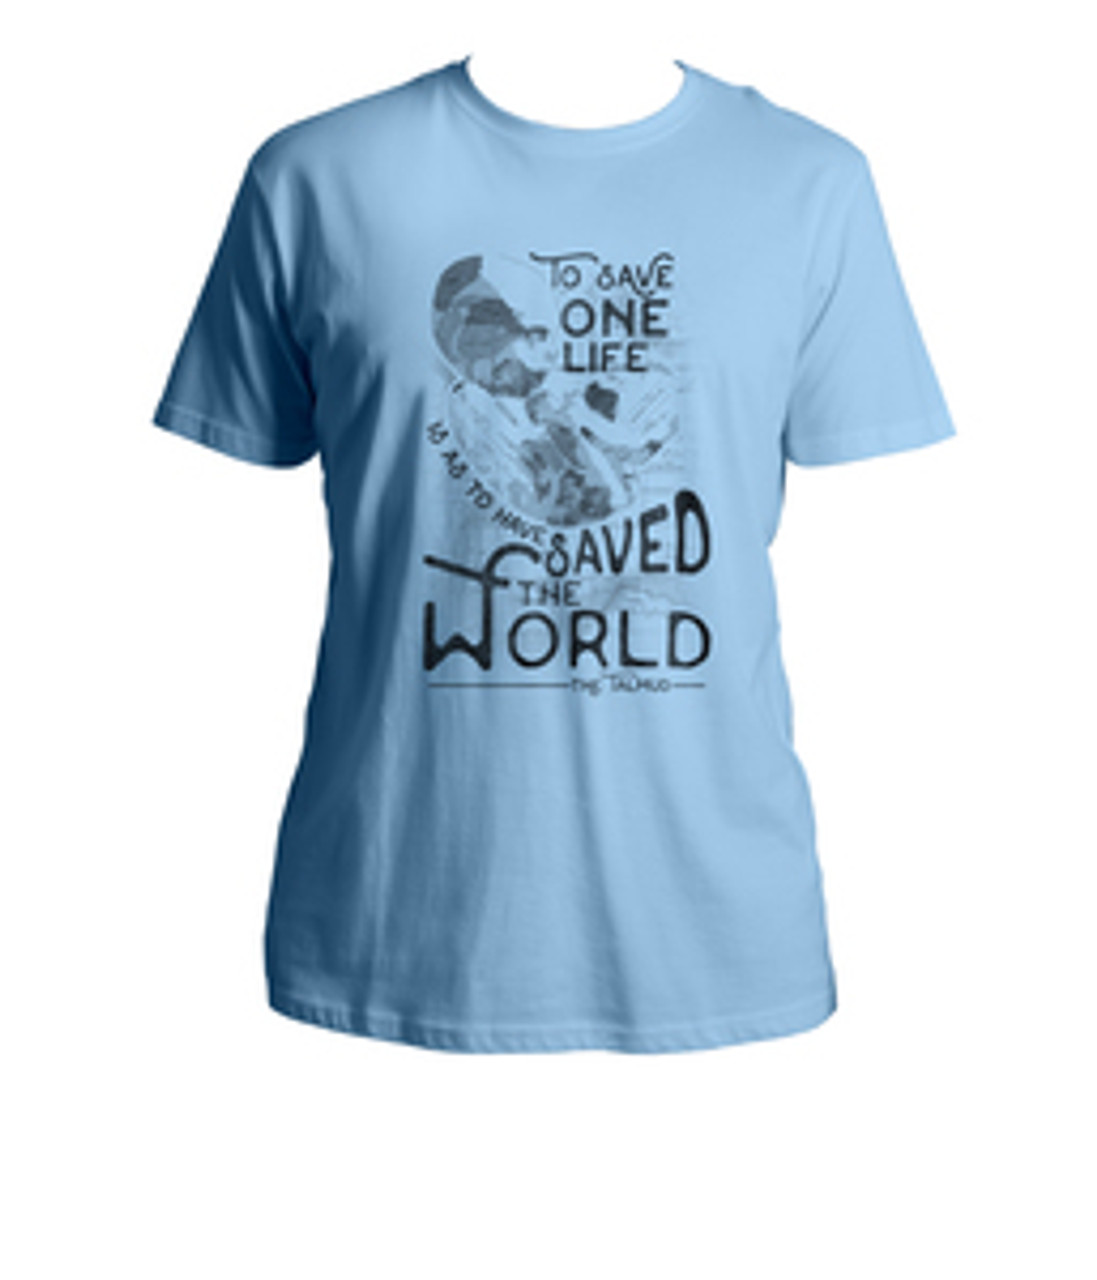 To Save One Life Talmud Light Blue T-Shirt